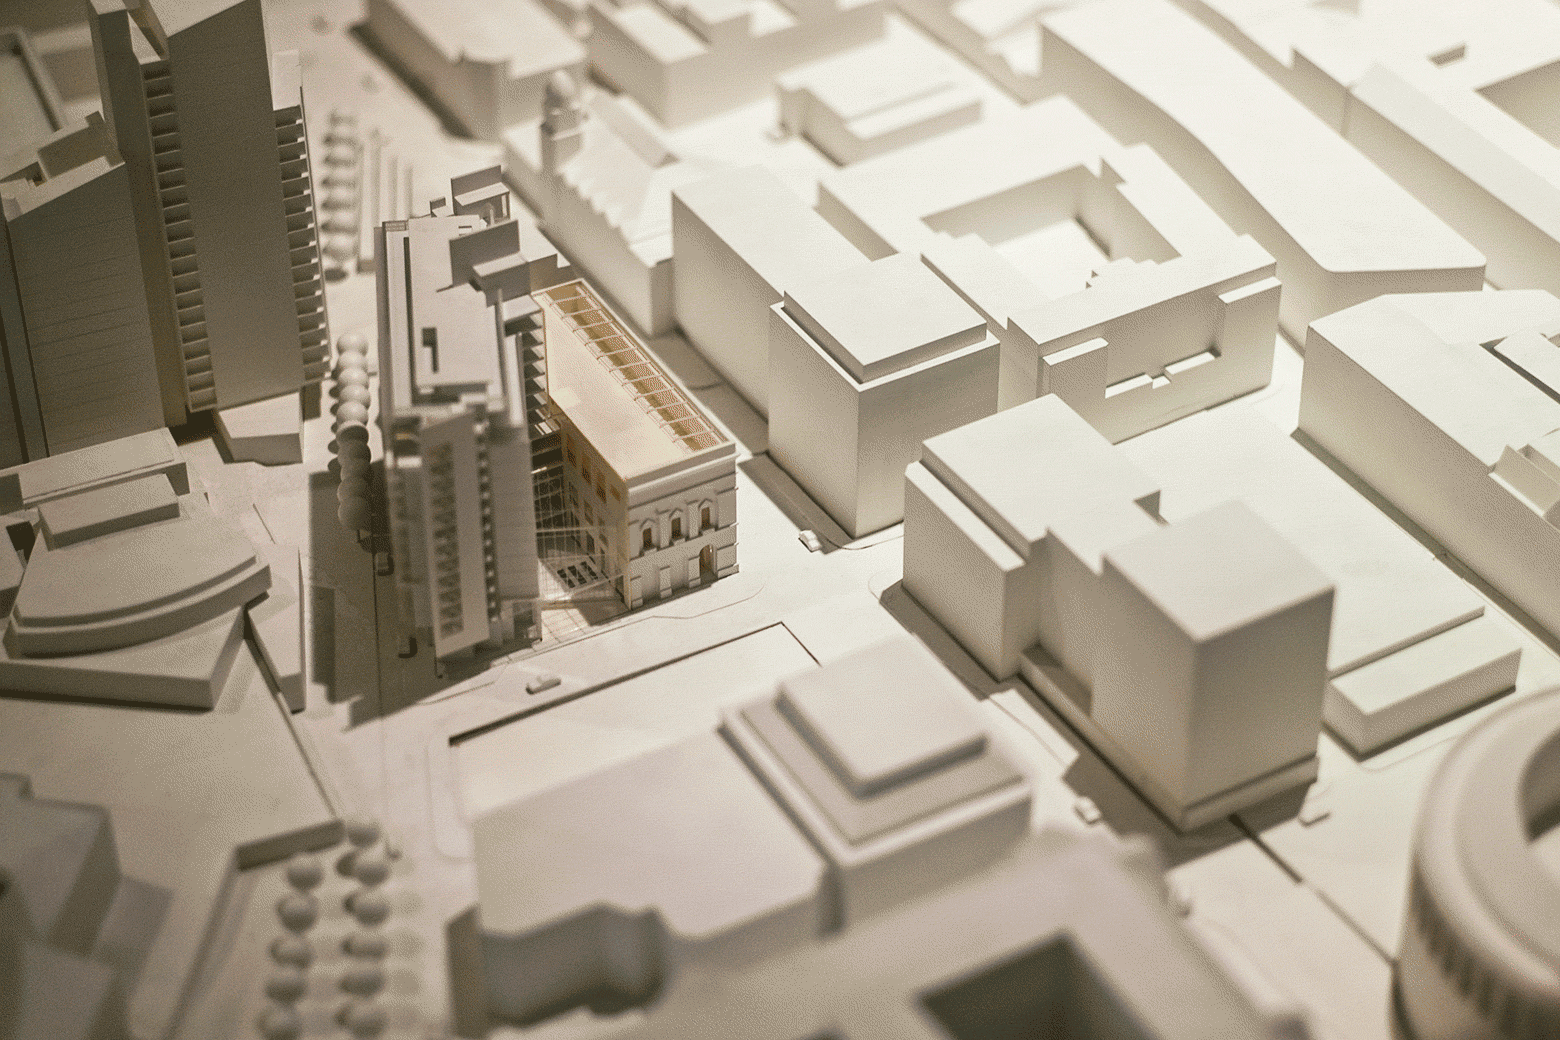 Red markings are drawn on a model city.